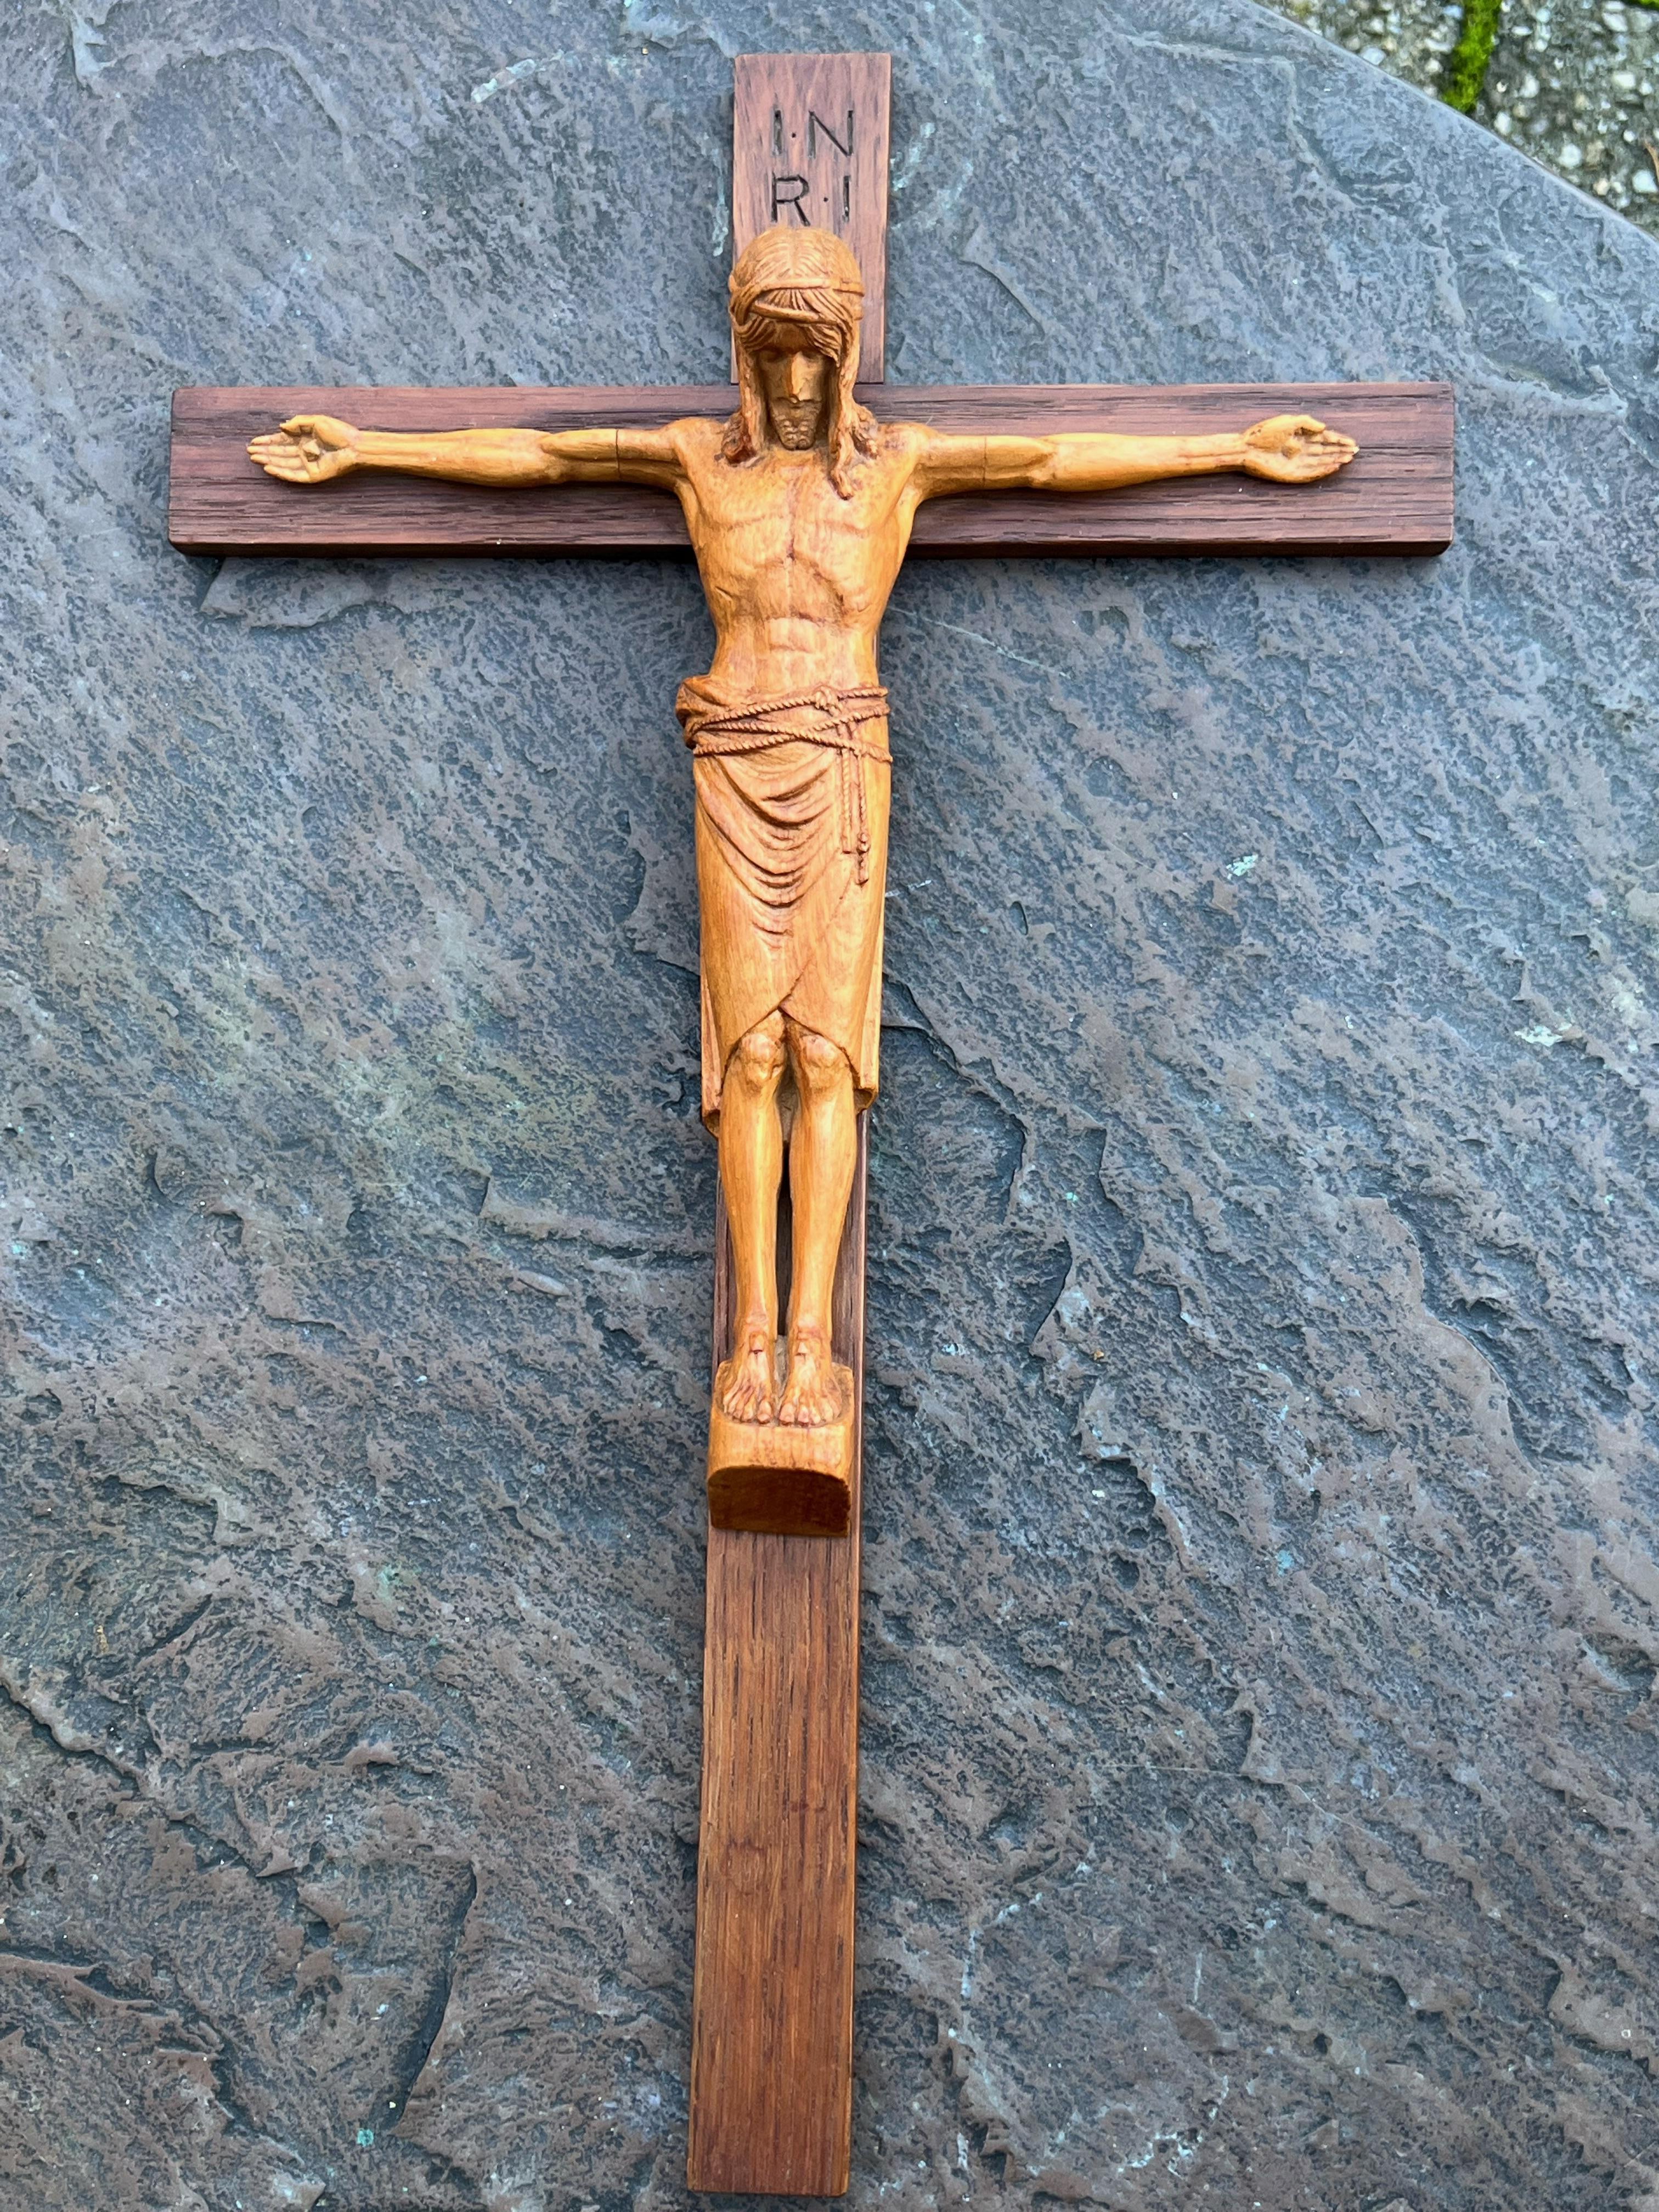 Amazingly wall crucifix with hand carved corpus from Kunstwerkstätten der Abtei Maria Laach.

Over the decades we have sold a number of unique and interesting crucifixes and this here finely carved and stylish specimen is right up there with the